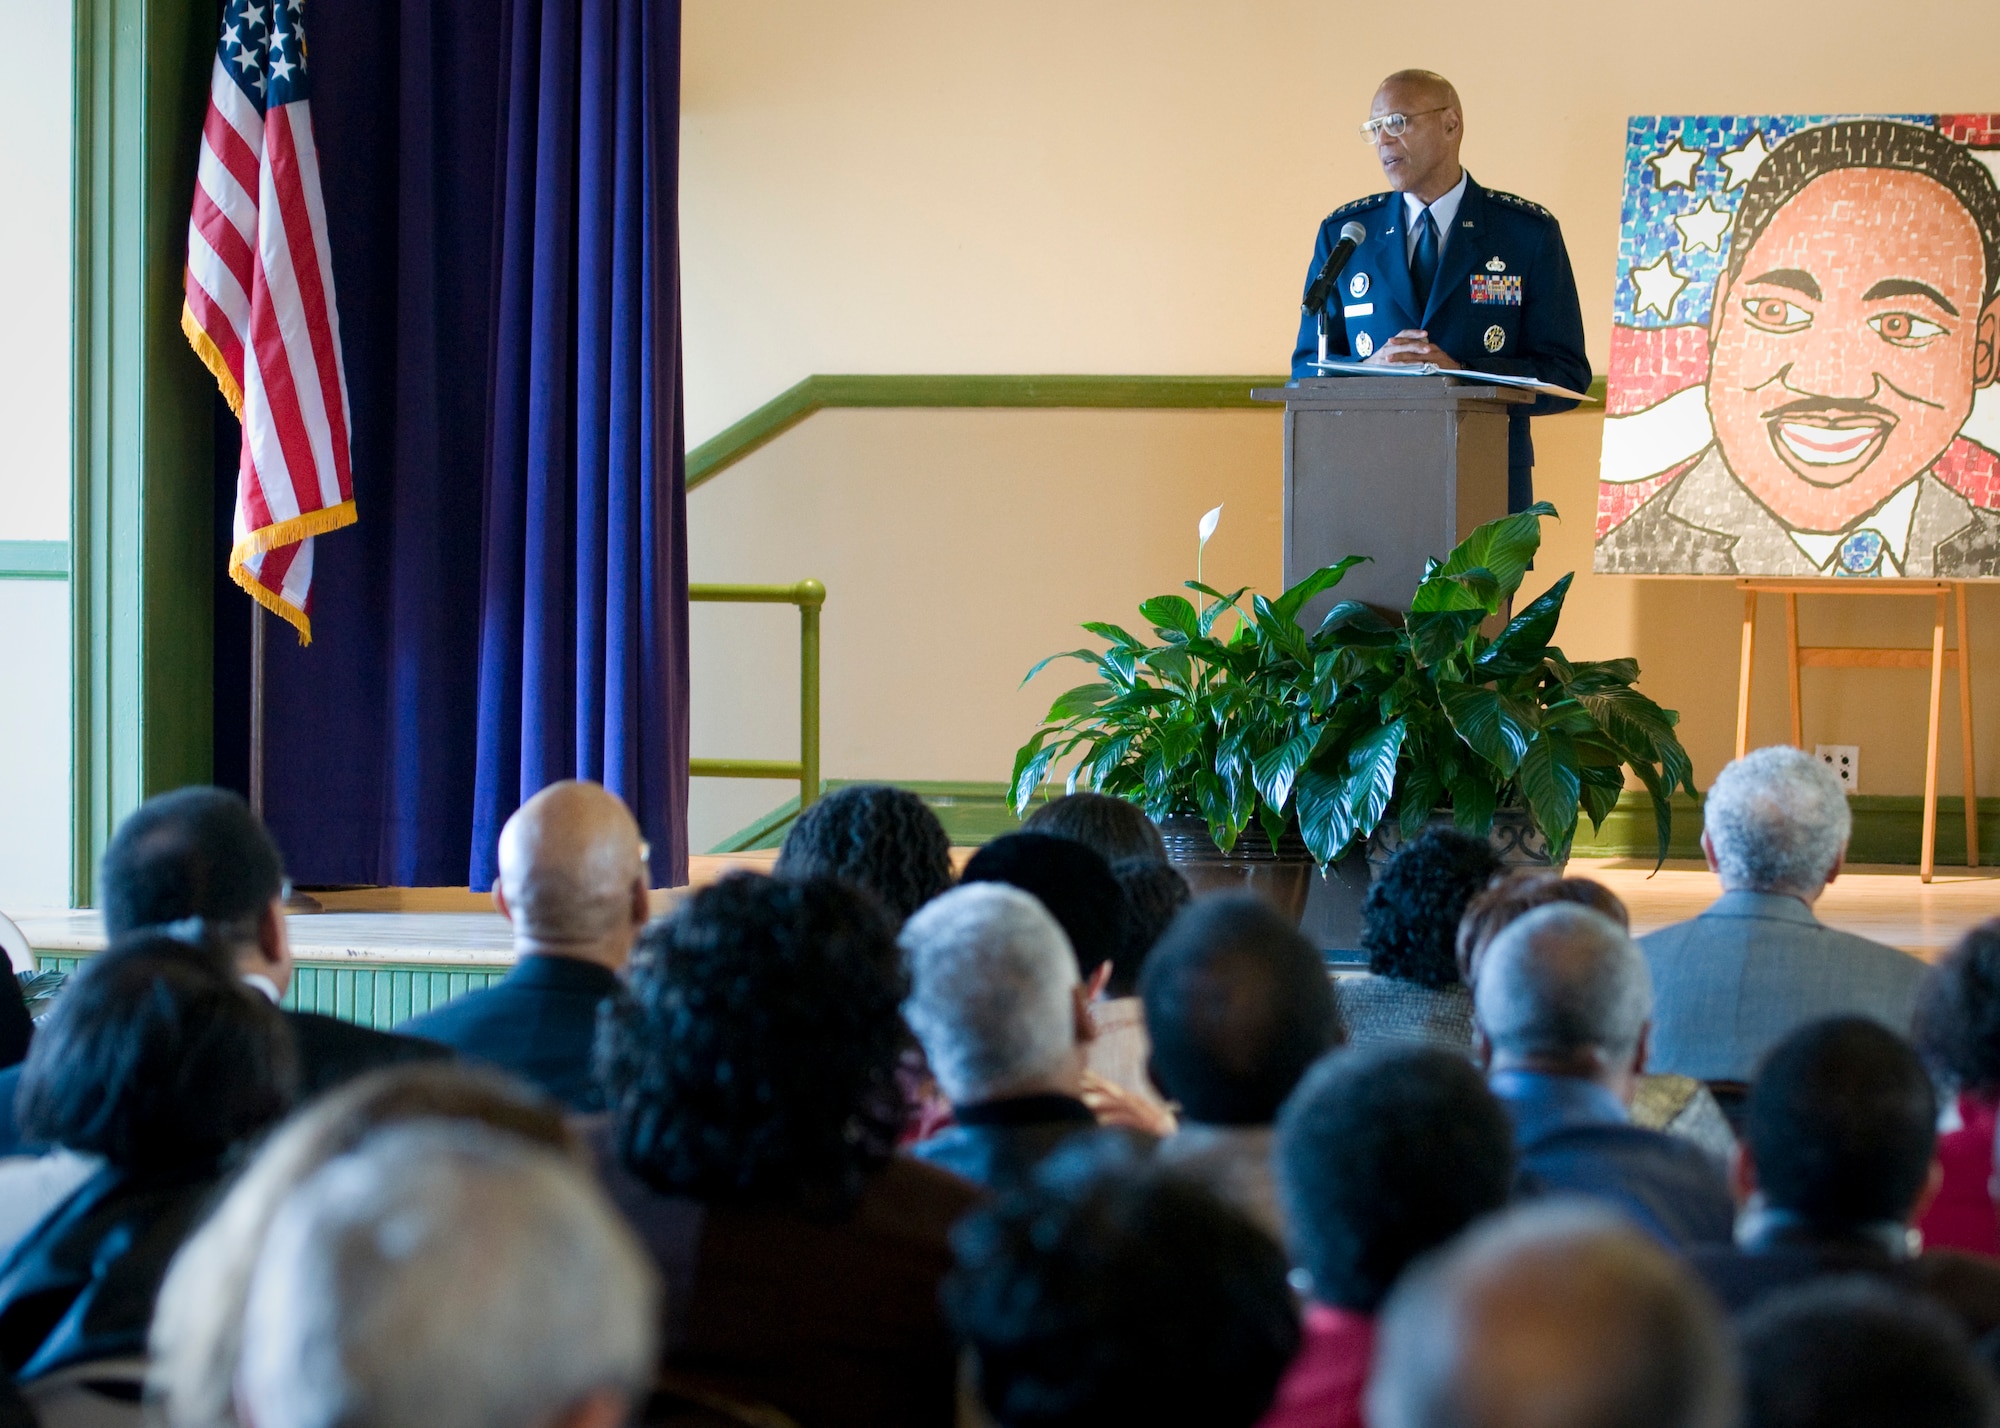 Air Force Vice Chief of Staff Gen. Larry Spencer speaks at a Martin Luther King, Jr. Commemoration at the Robert Russa Moton Museum in Farmville, Va., Jan. 12. Spencer recounted his mother's experience on April 23, 1951, when she and more than 450 other students walked out of the all-black, R. R. Moton High School in Farmville, demanding equality. (U.S. Air Force photo/Lt. Col. John Sheets)